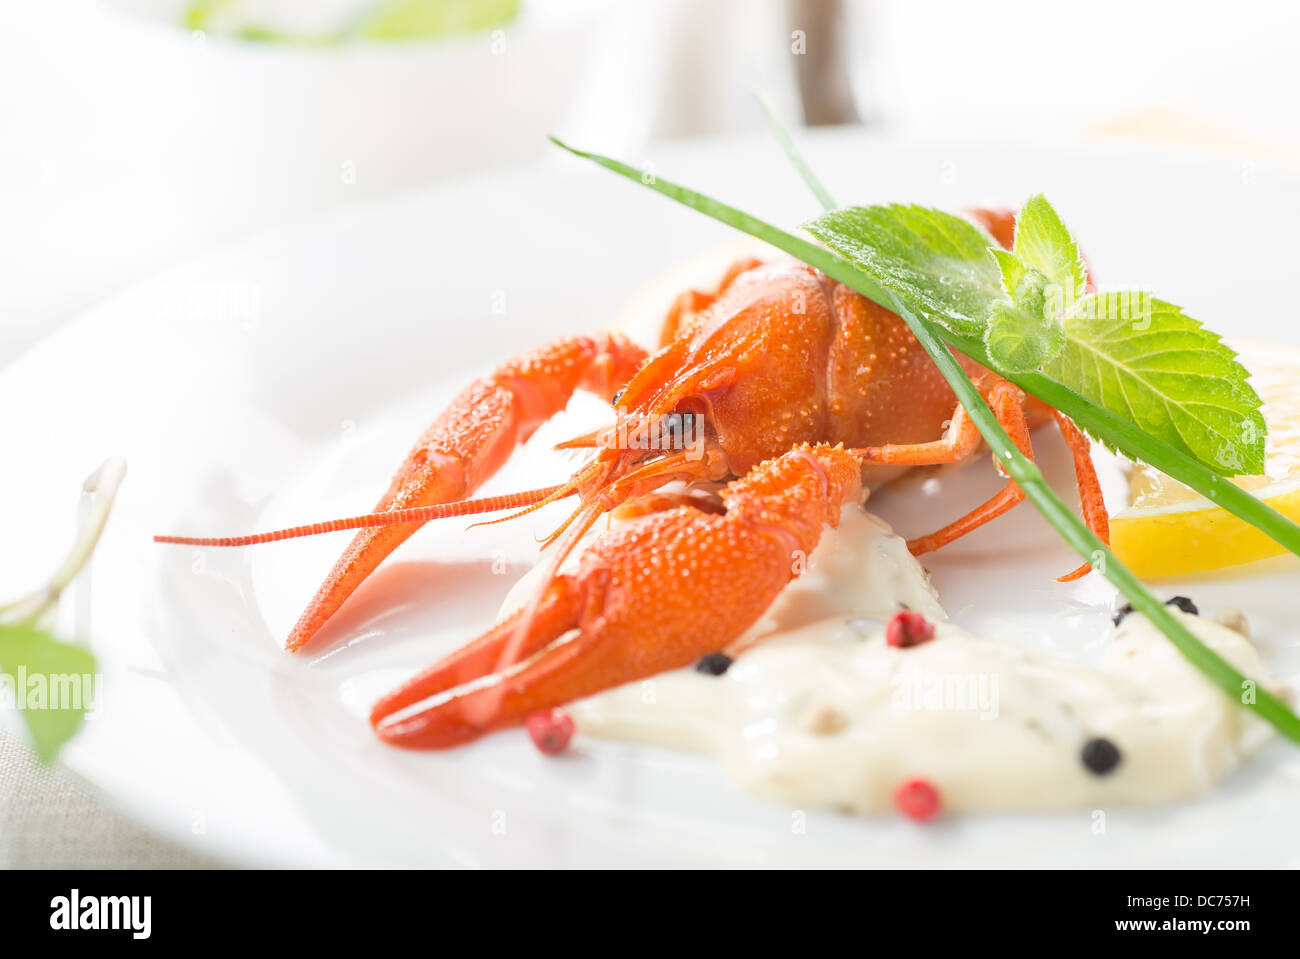 Red lobster with lemon and greens on a white plate Stock Photo